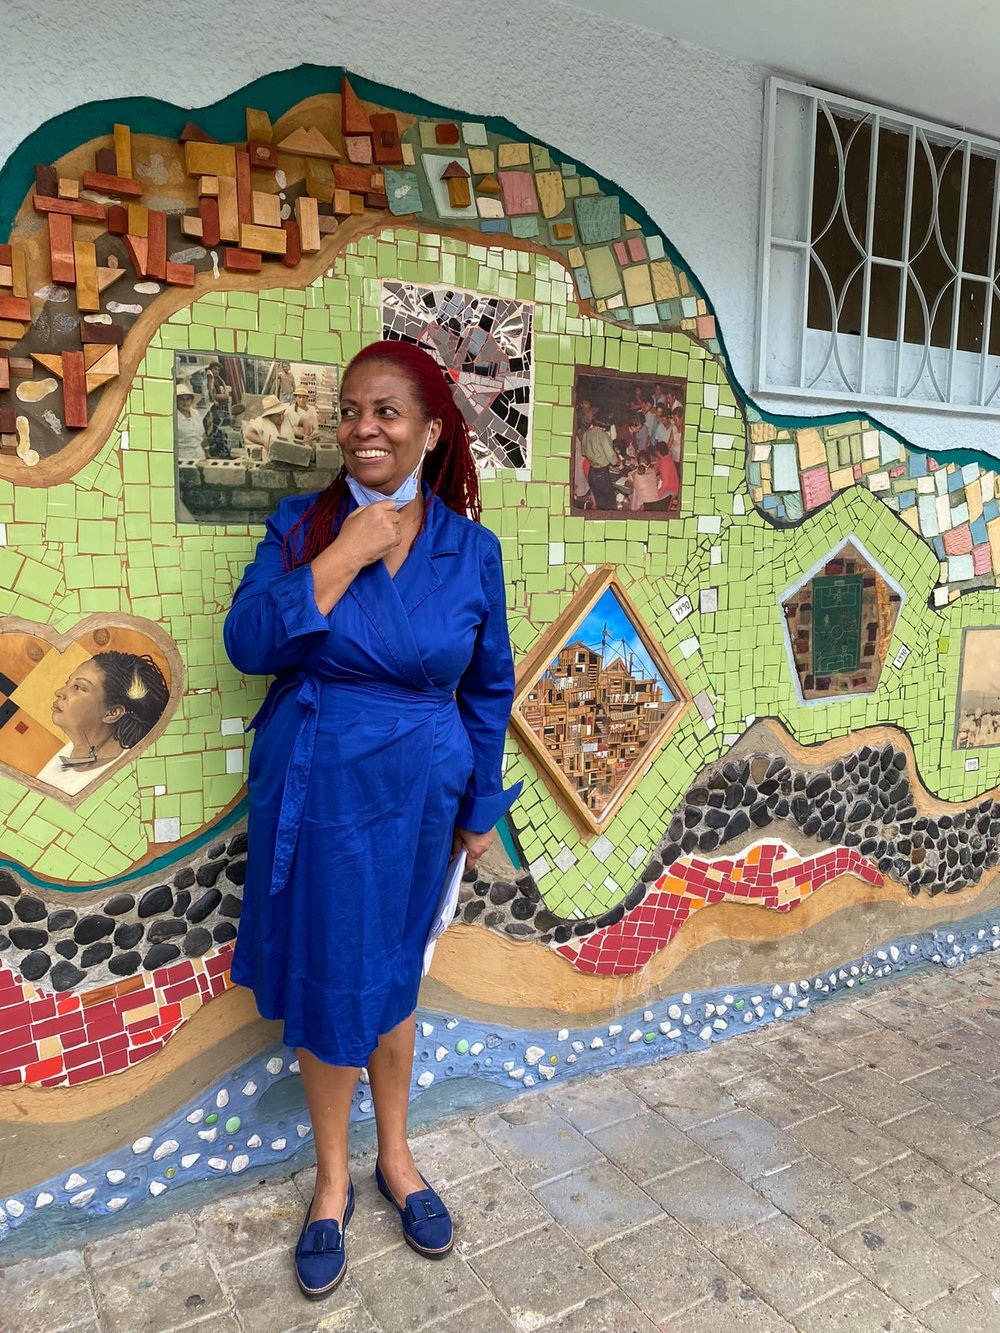  Betsy Edith Rentería Bonilla, is the principal of the Fe y Alegría school, which educates students, the majority of them Afro-Colombian. She introduced the first course in Afro culture and history to help students appreciate their rich culture. 